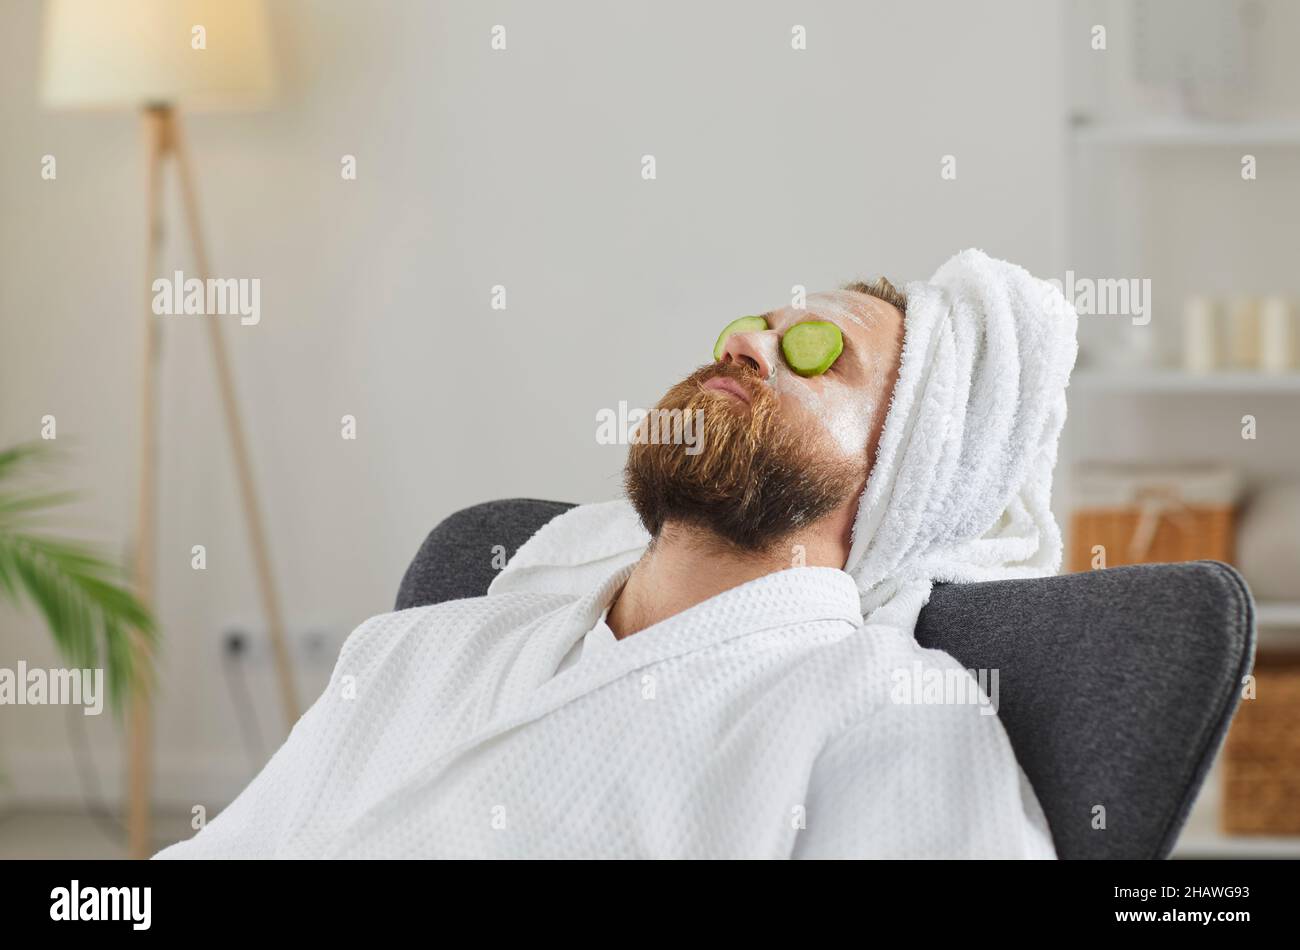 Relaxed man with beauty mask on face and cucumber slices on eyes enjoying spa day at home Stock Photo